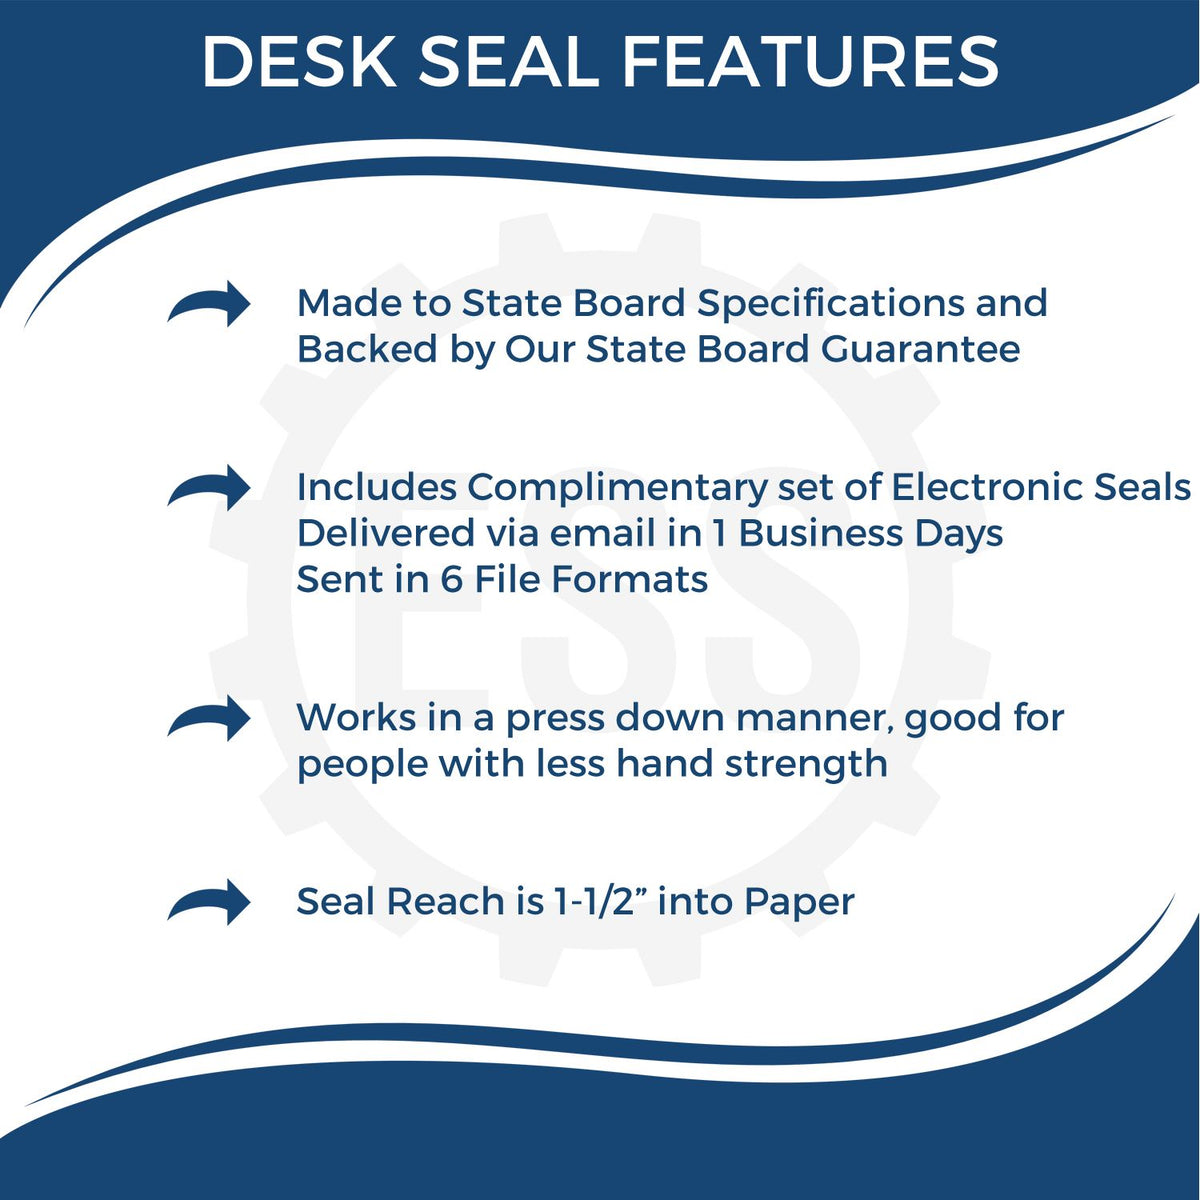 A picture of an infographic highlighting the selling points for the Guam Engineer Desk Seal